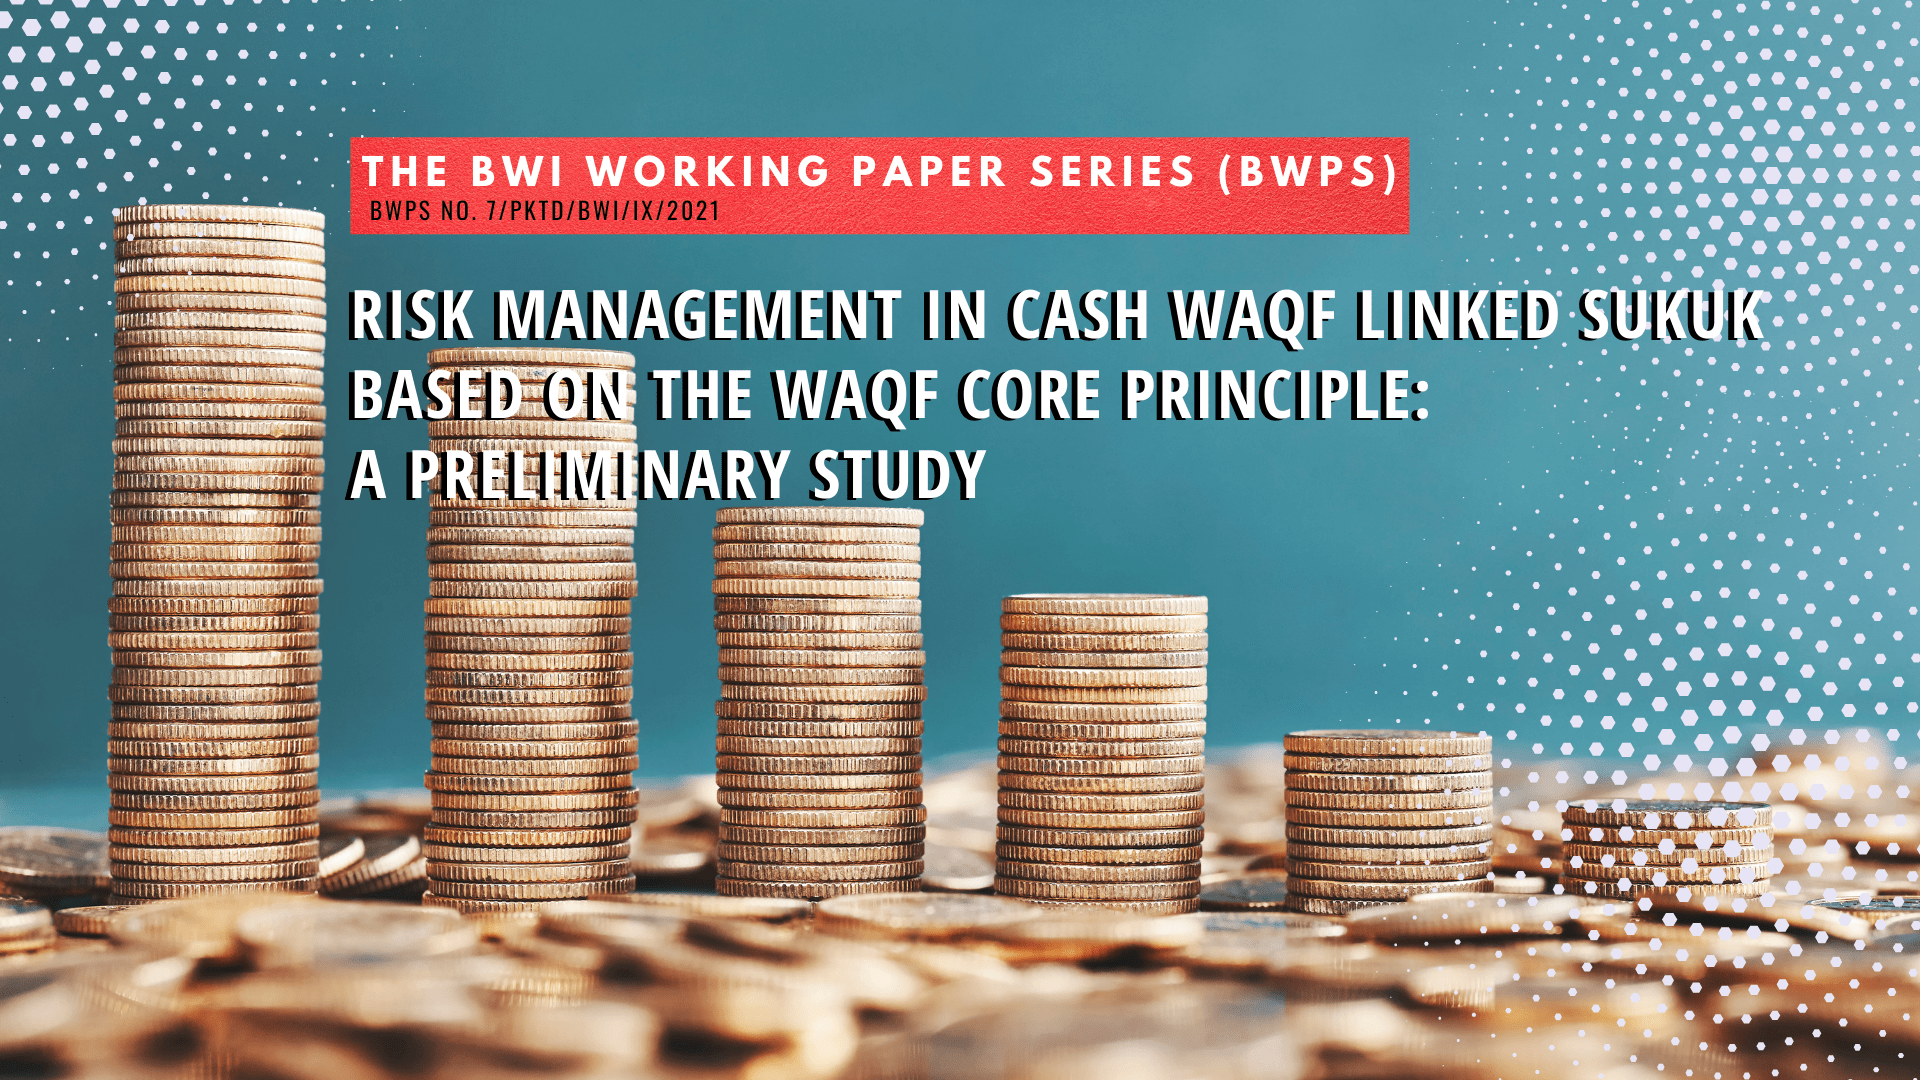 Risk Management in Cash Waqf Linked Sukuk Based on the Waqf Core Principle: A Preliminary Study – BWPS No. 07 2021